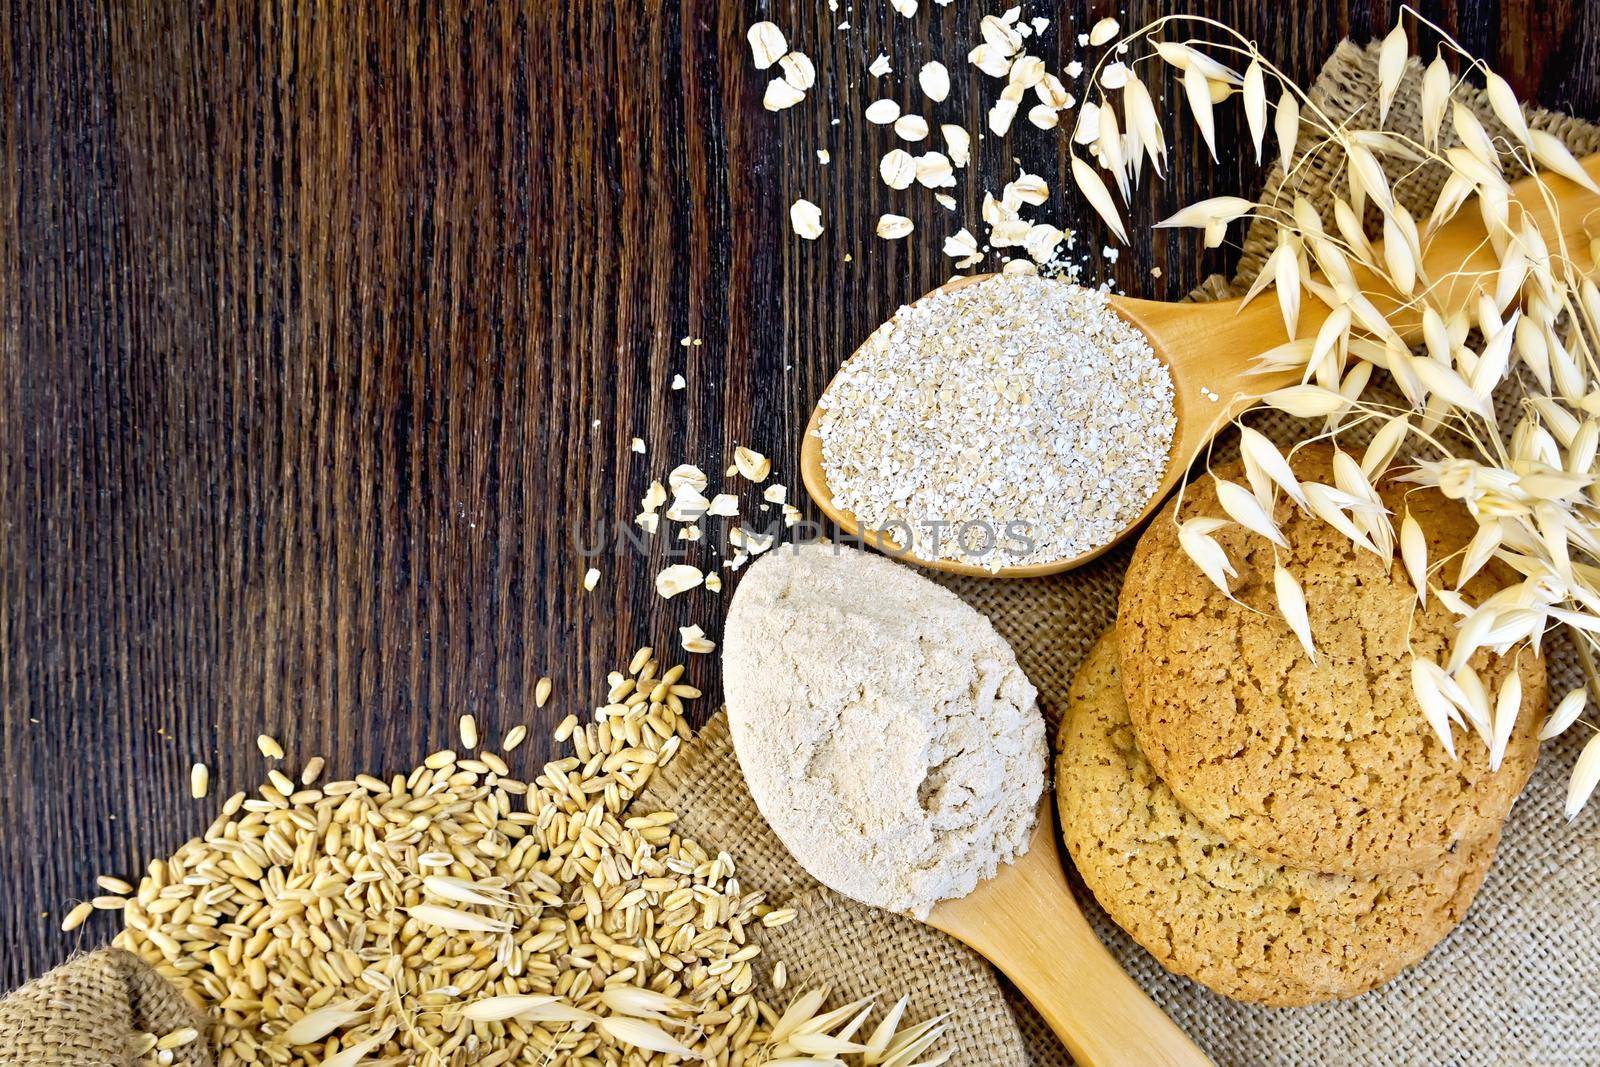 Flour and bran oaten in a spoons, stalks of oats, grits and biscuits on a background sacking on a wooden board